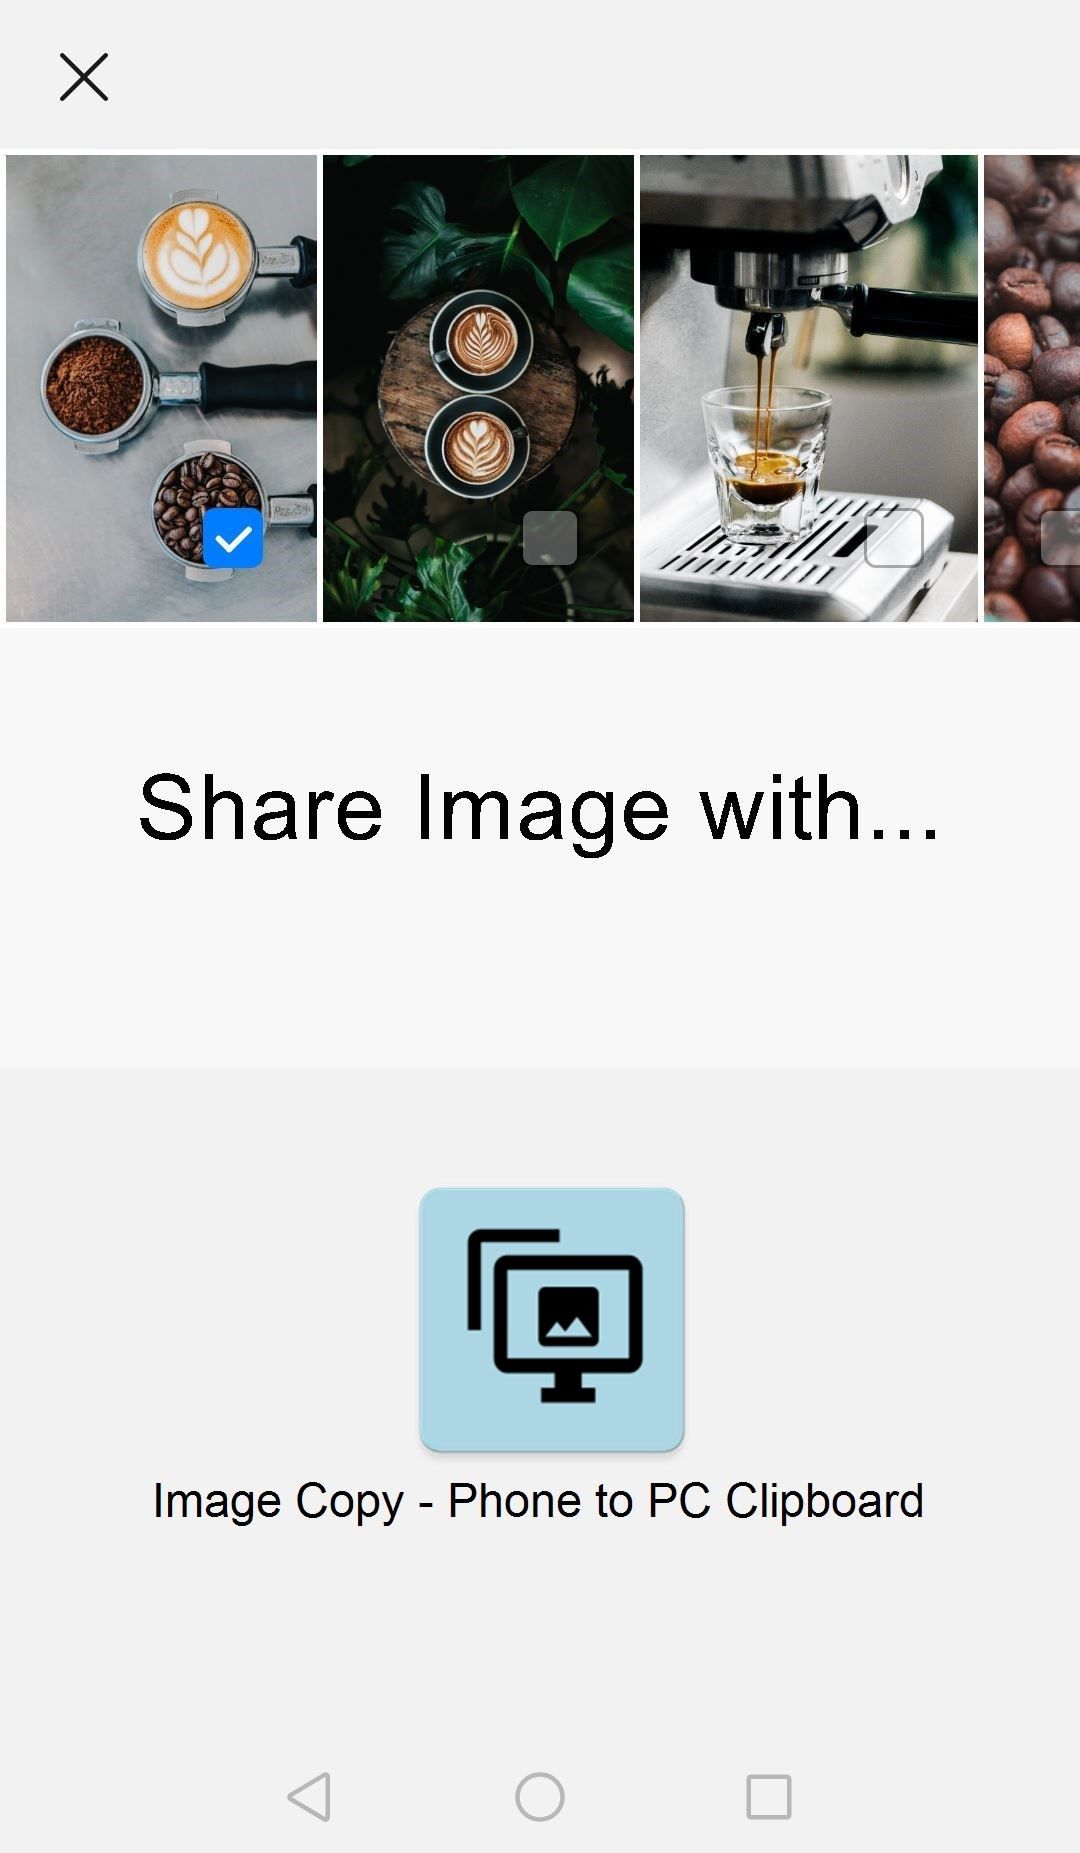 Share your images from external applications (e.g. from your phone's image gallery)